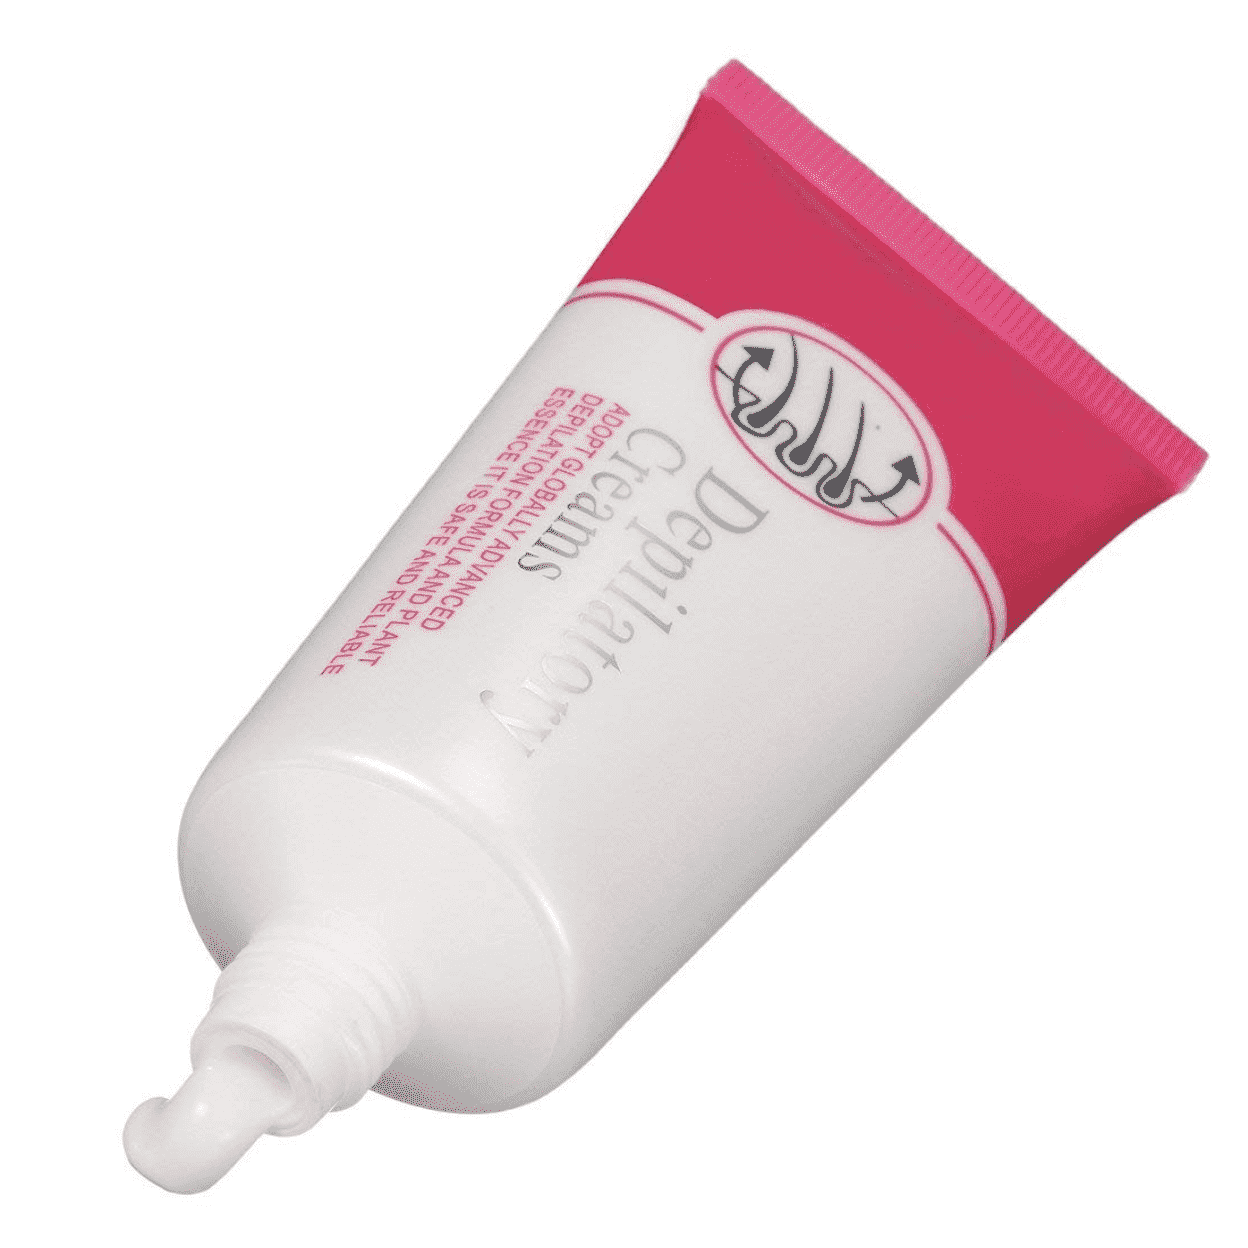 Pain Free Hair Removal Cream